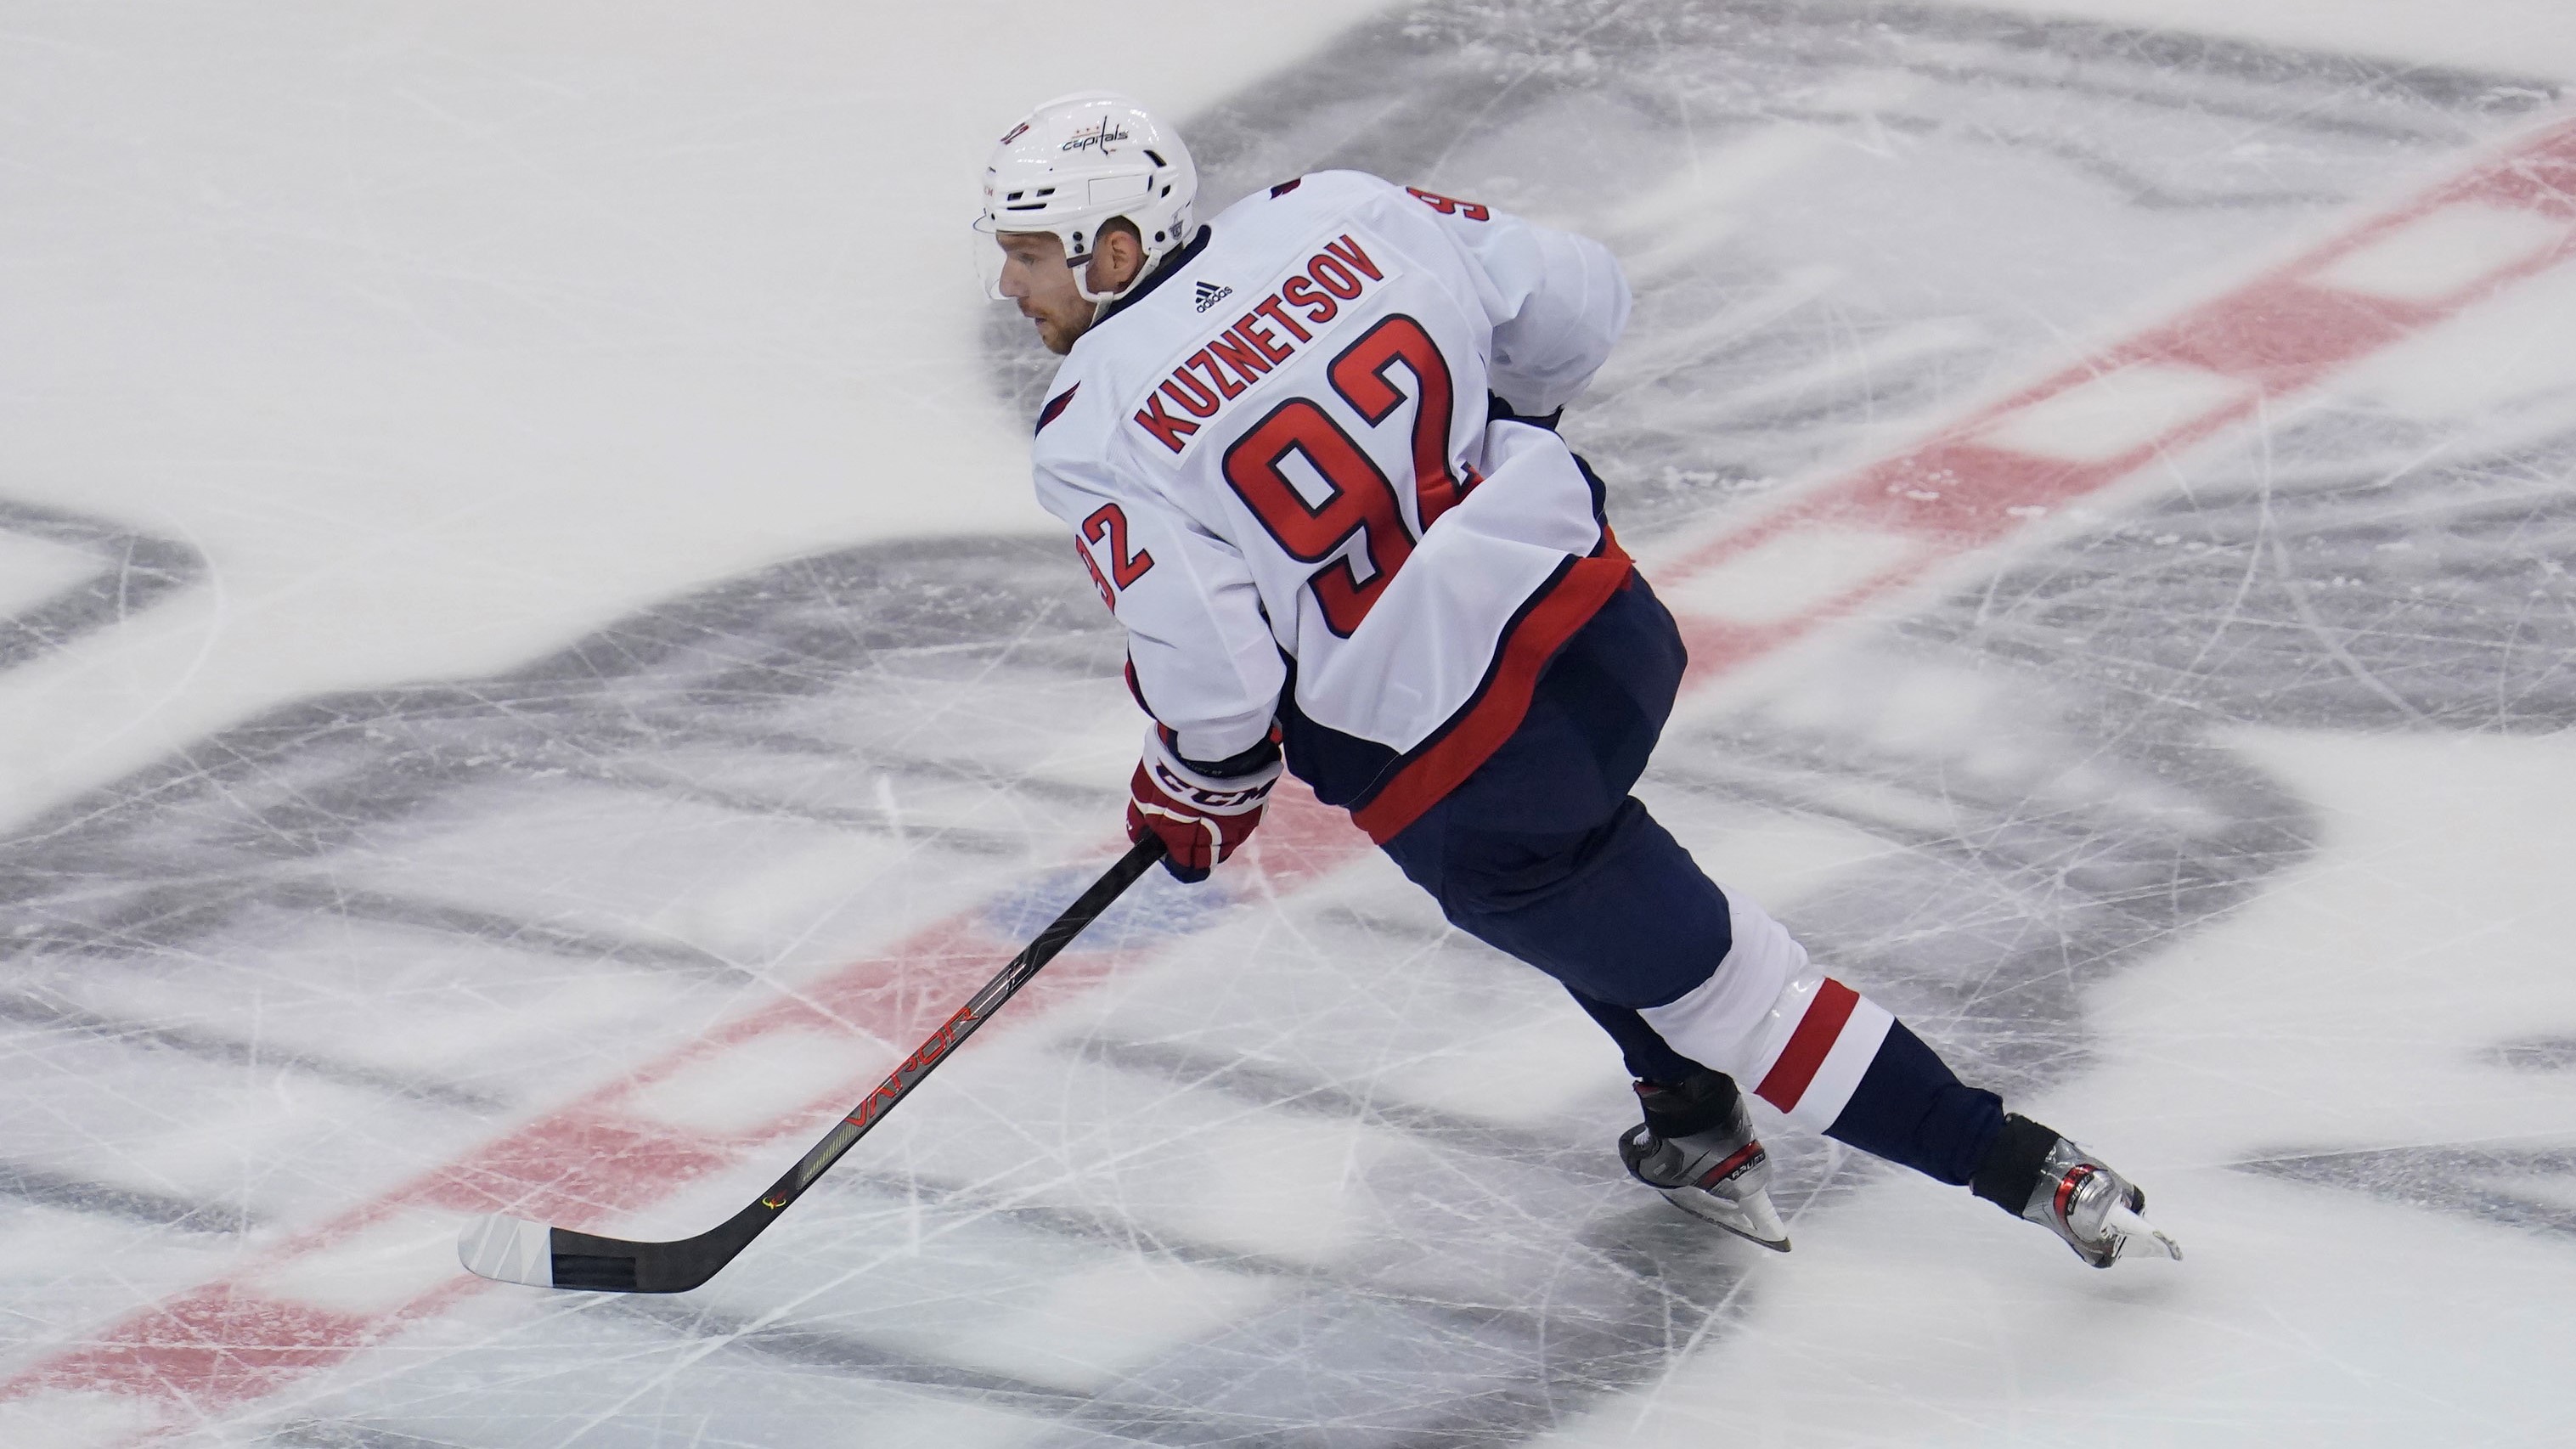 Evgeny Kuznetsov Moves Into Capitals' Top 4 All-Time With Game 3 Goal